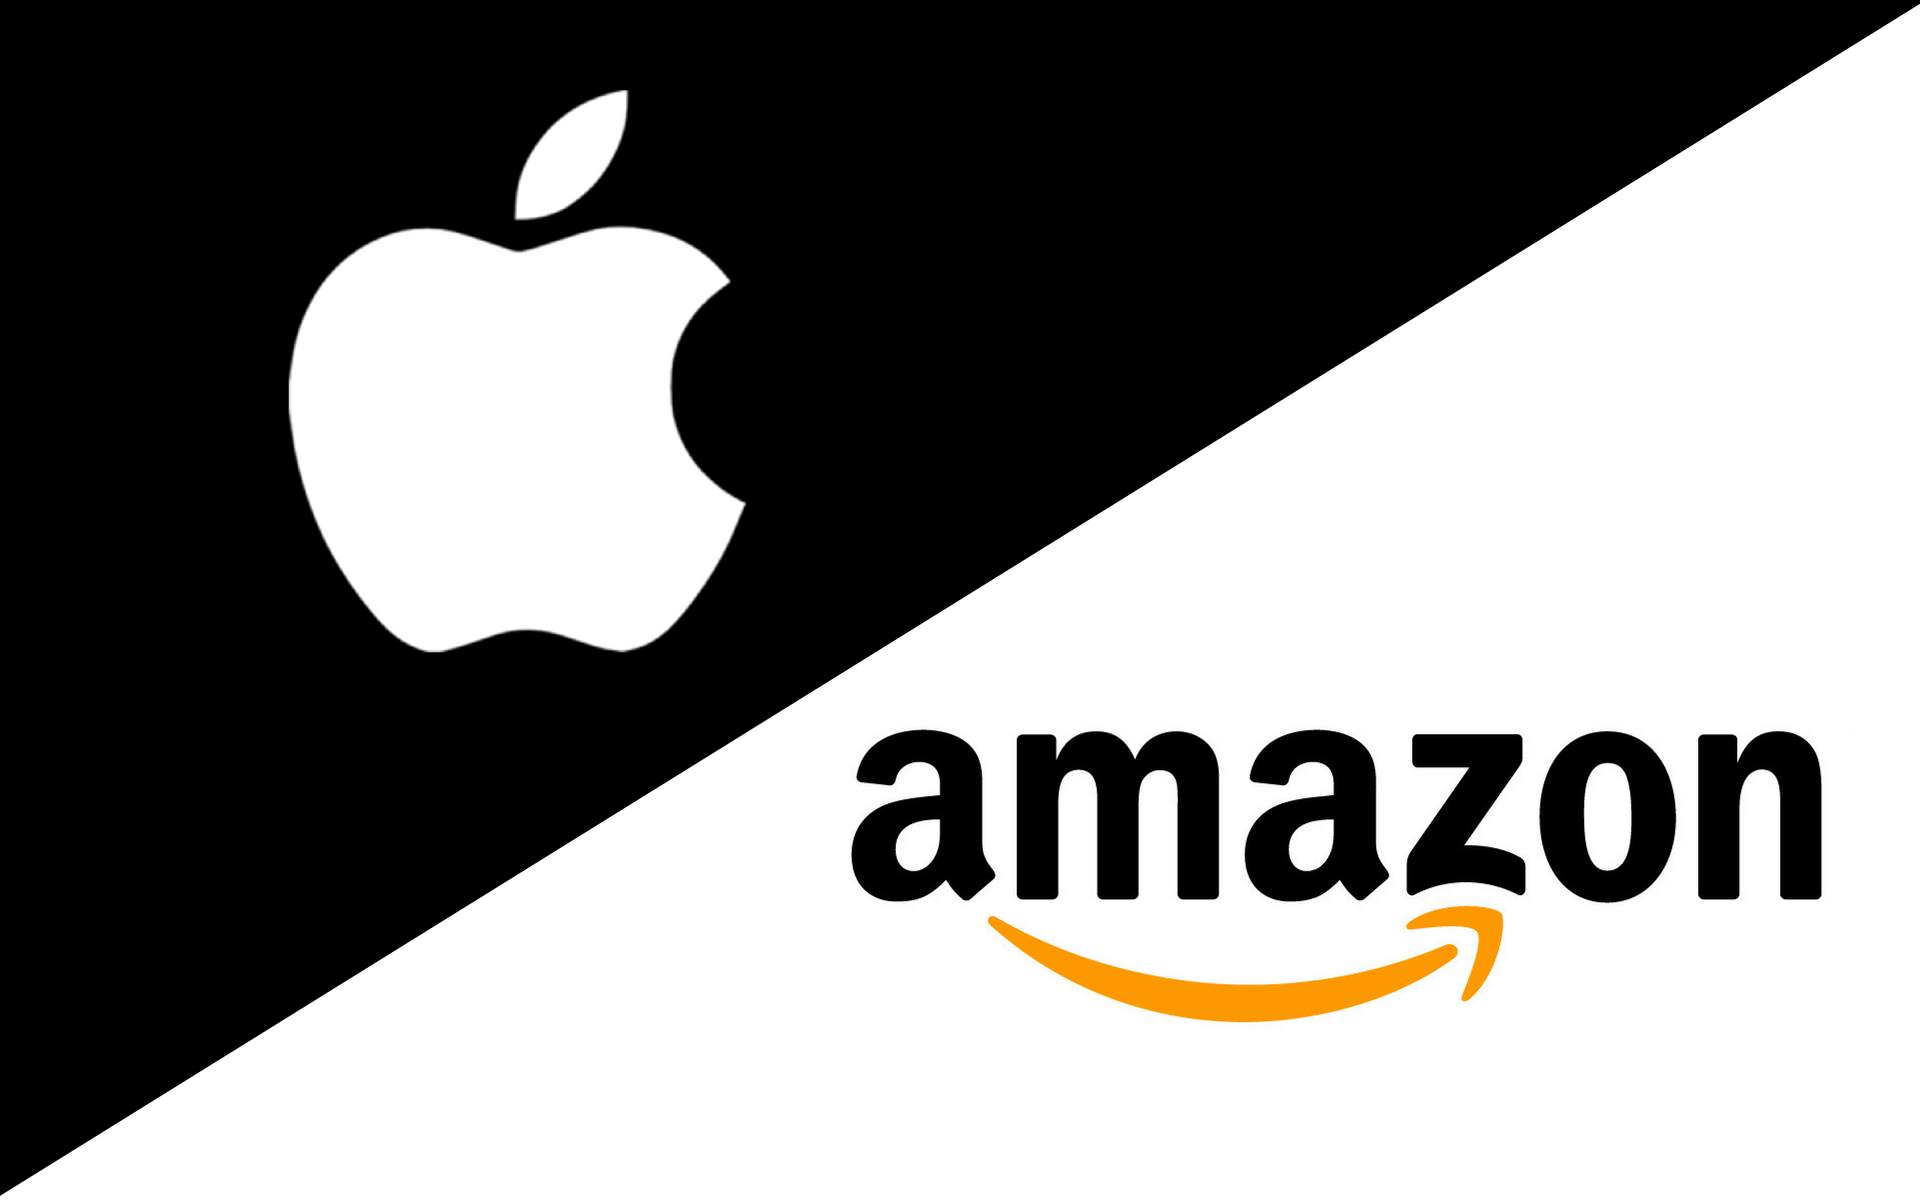 Amazon and Apple warn of supply chain issues